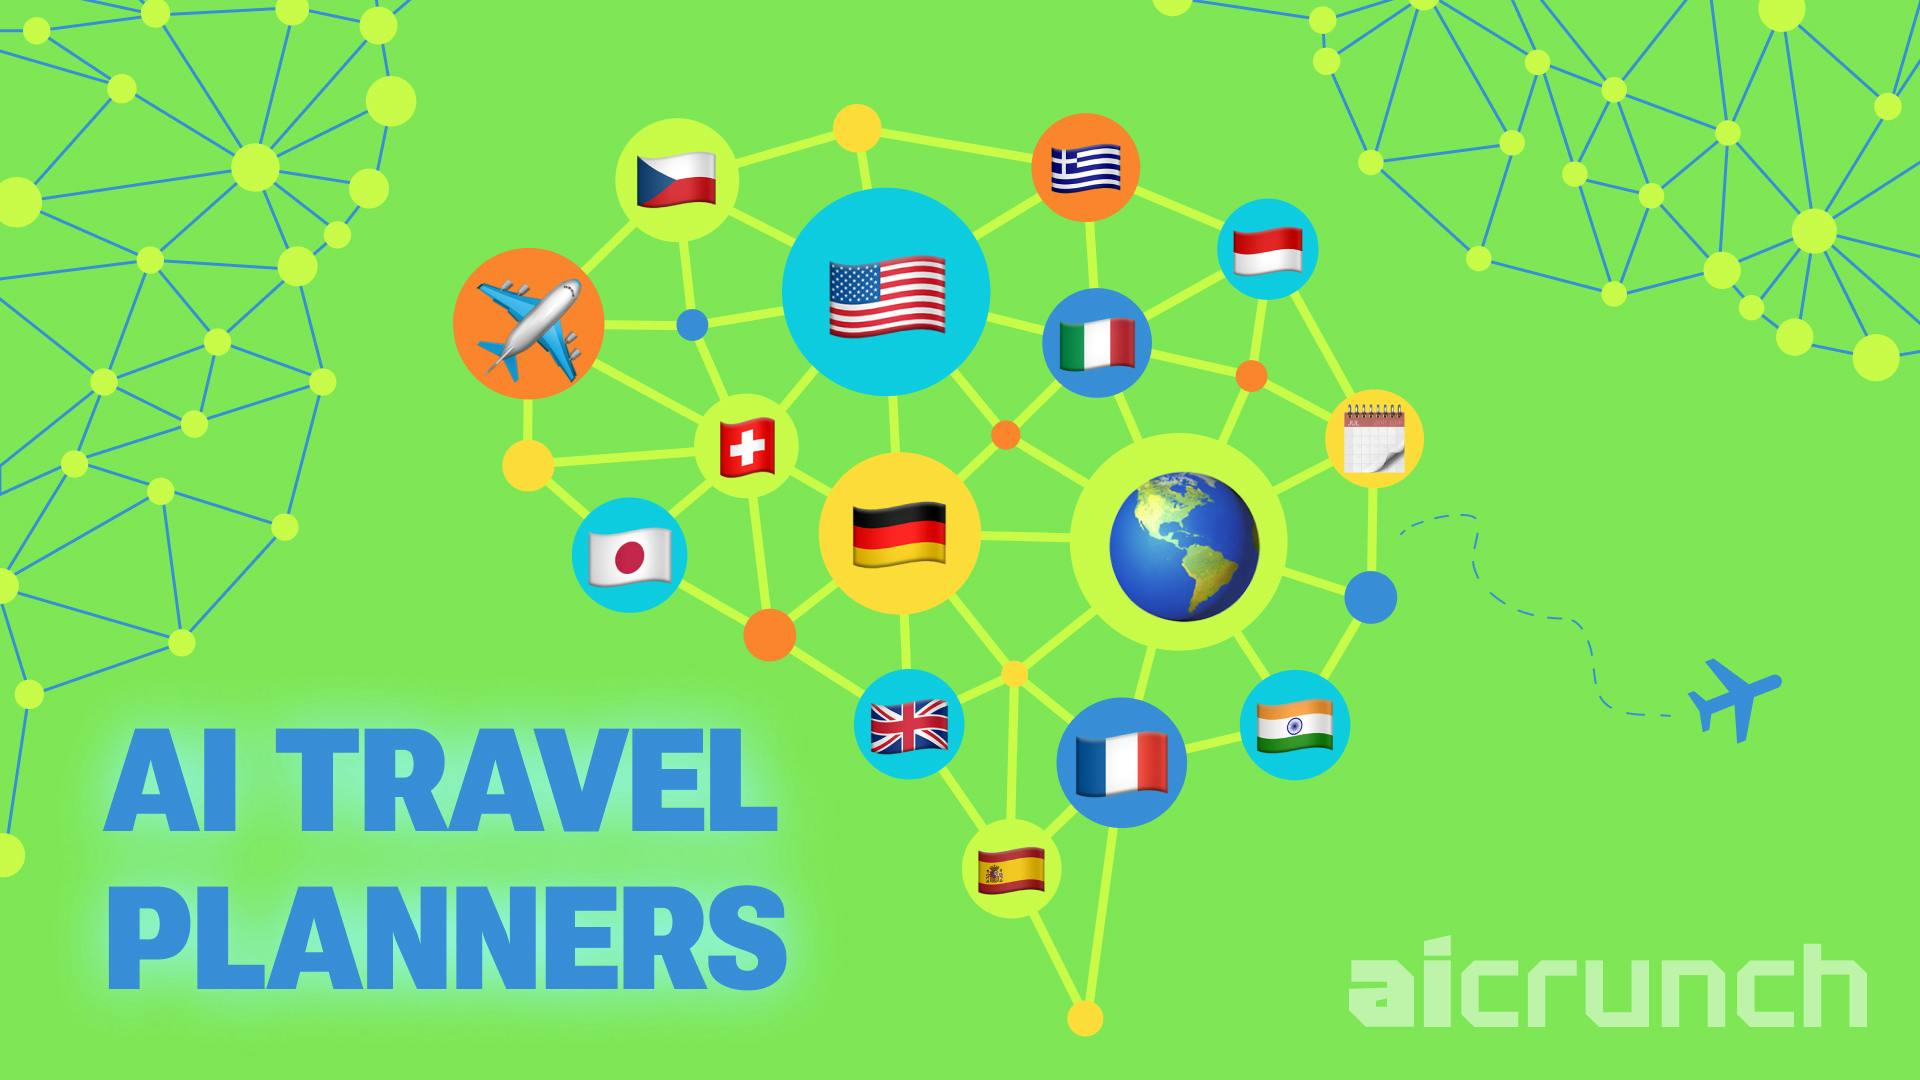 Unleashing adventures: how AI travel planners are revolutionizing your trips